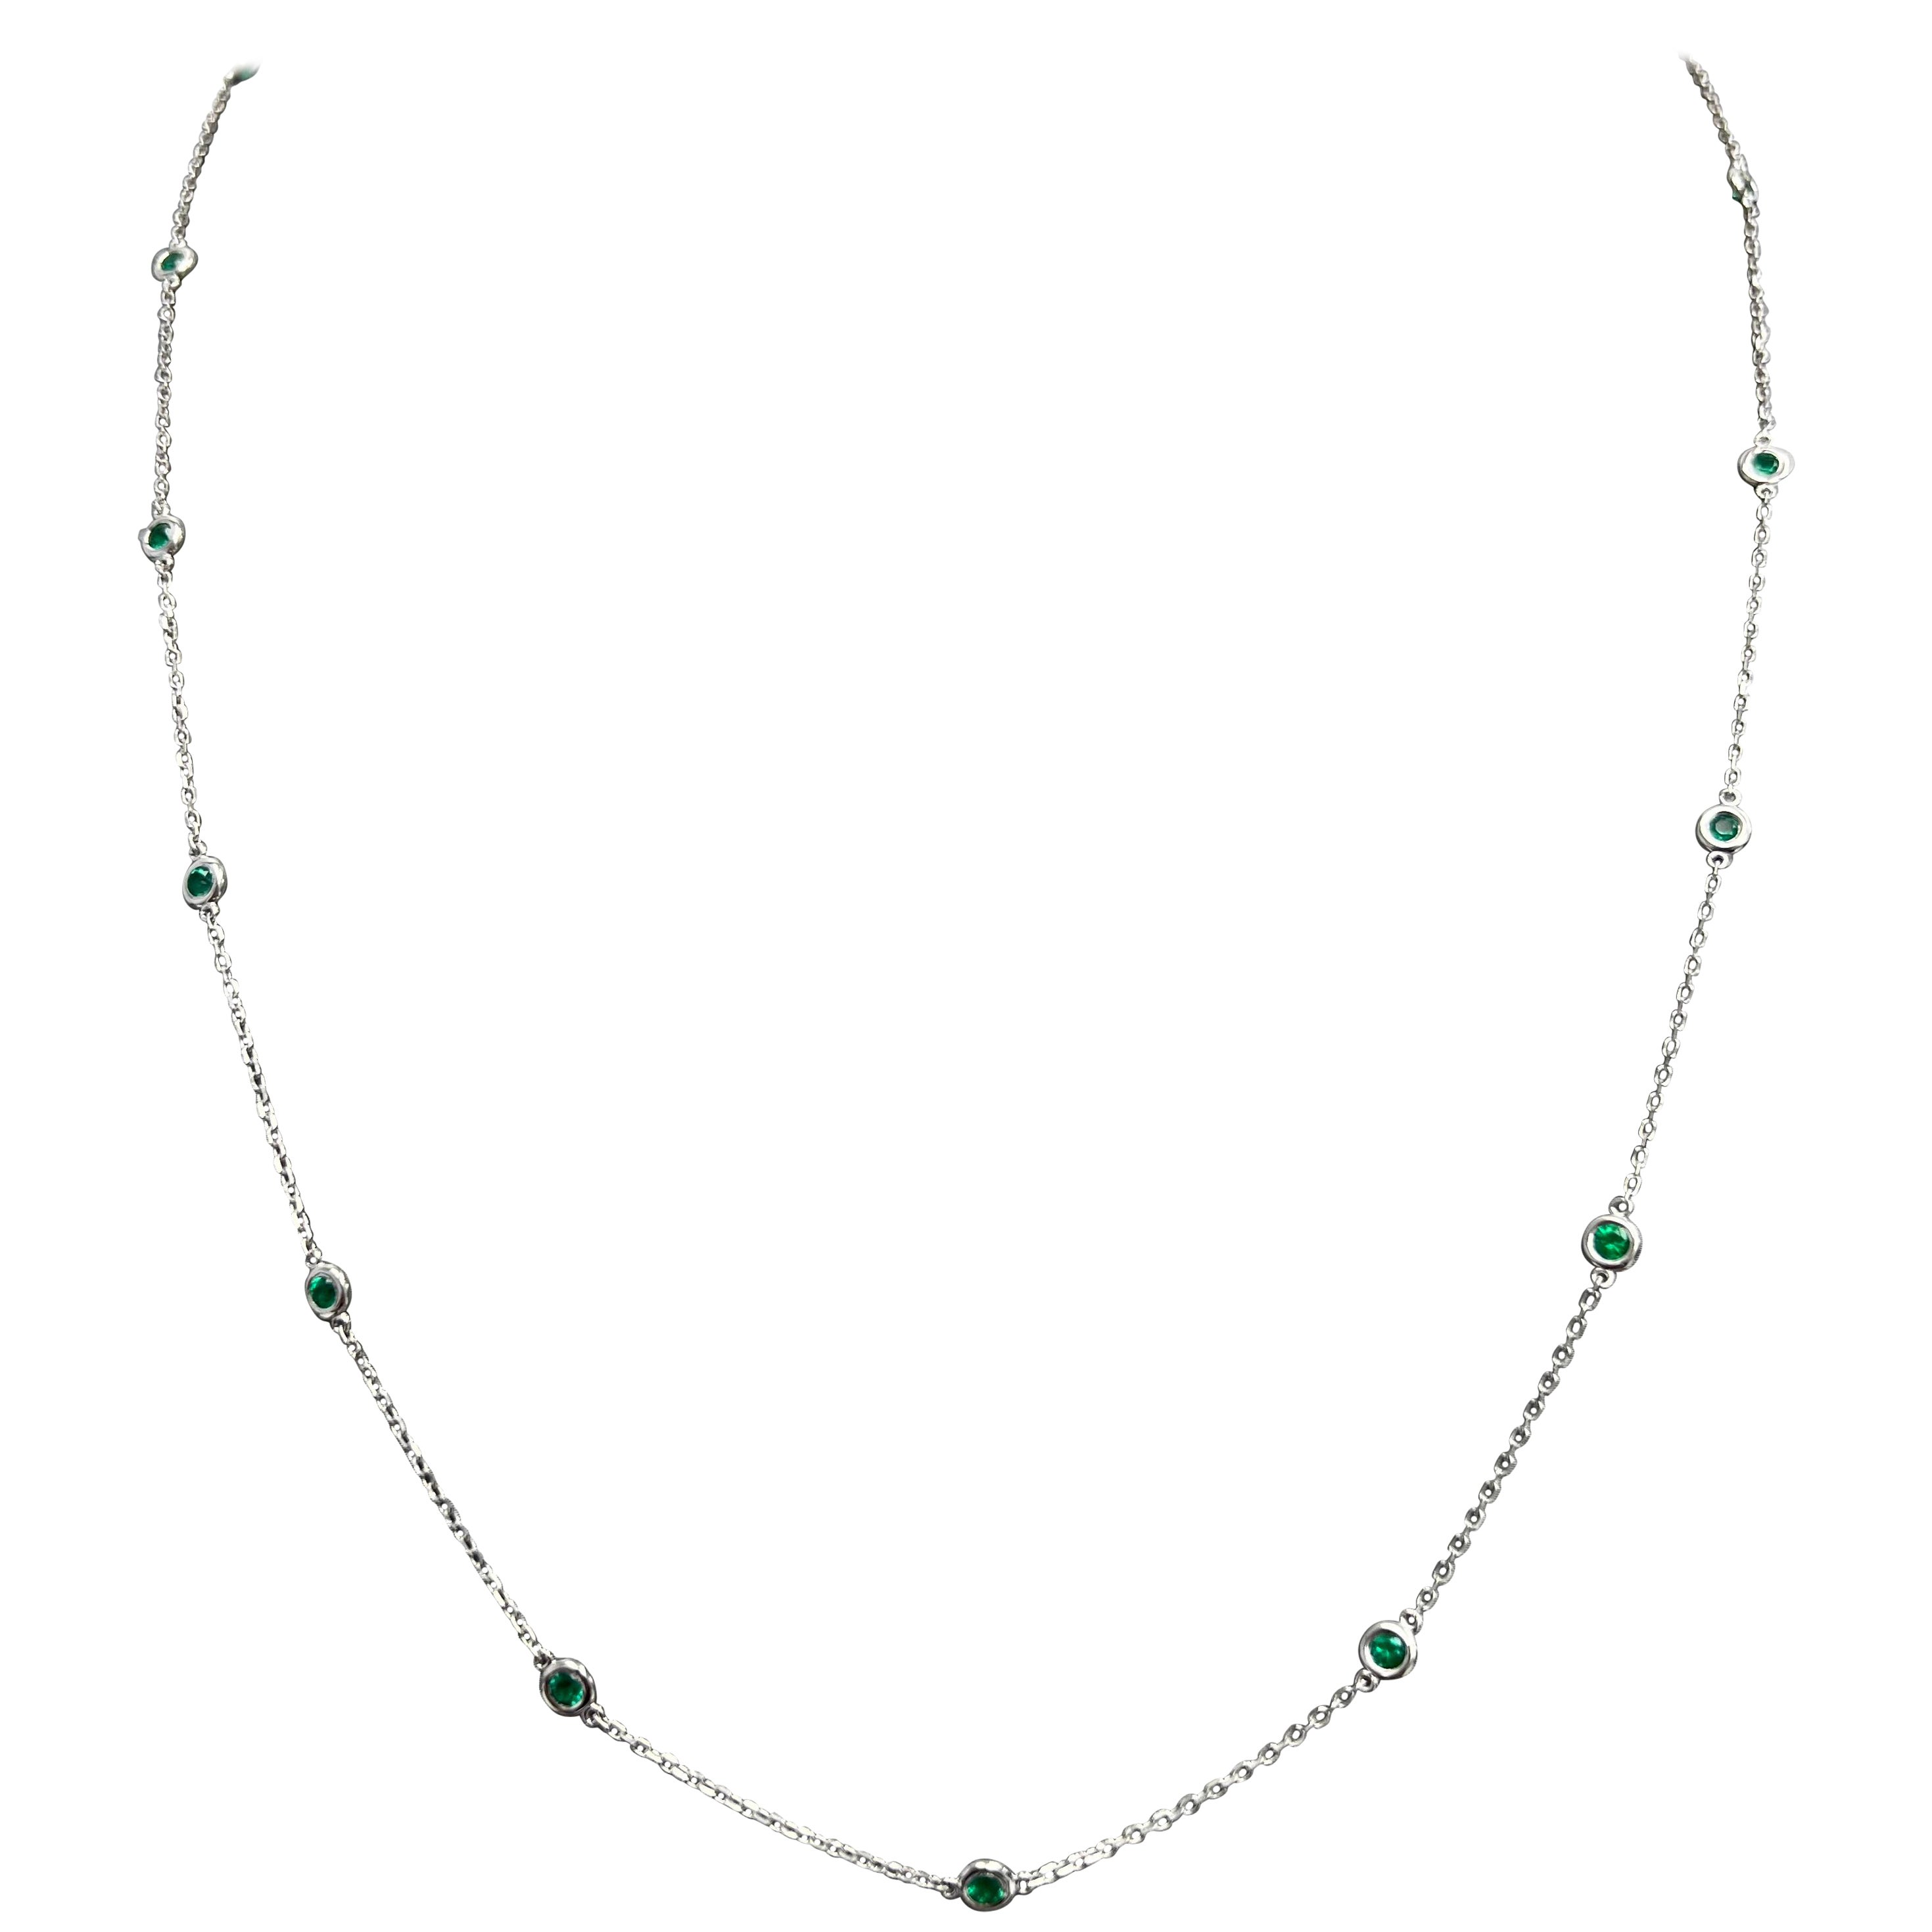 Diamonds by The Yard Chain Necklace in 14k White with Natural Emerald Gem-stones